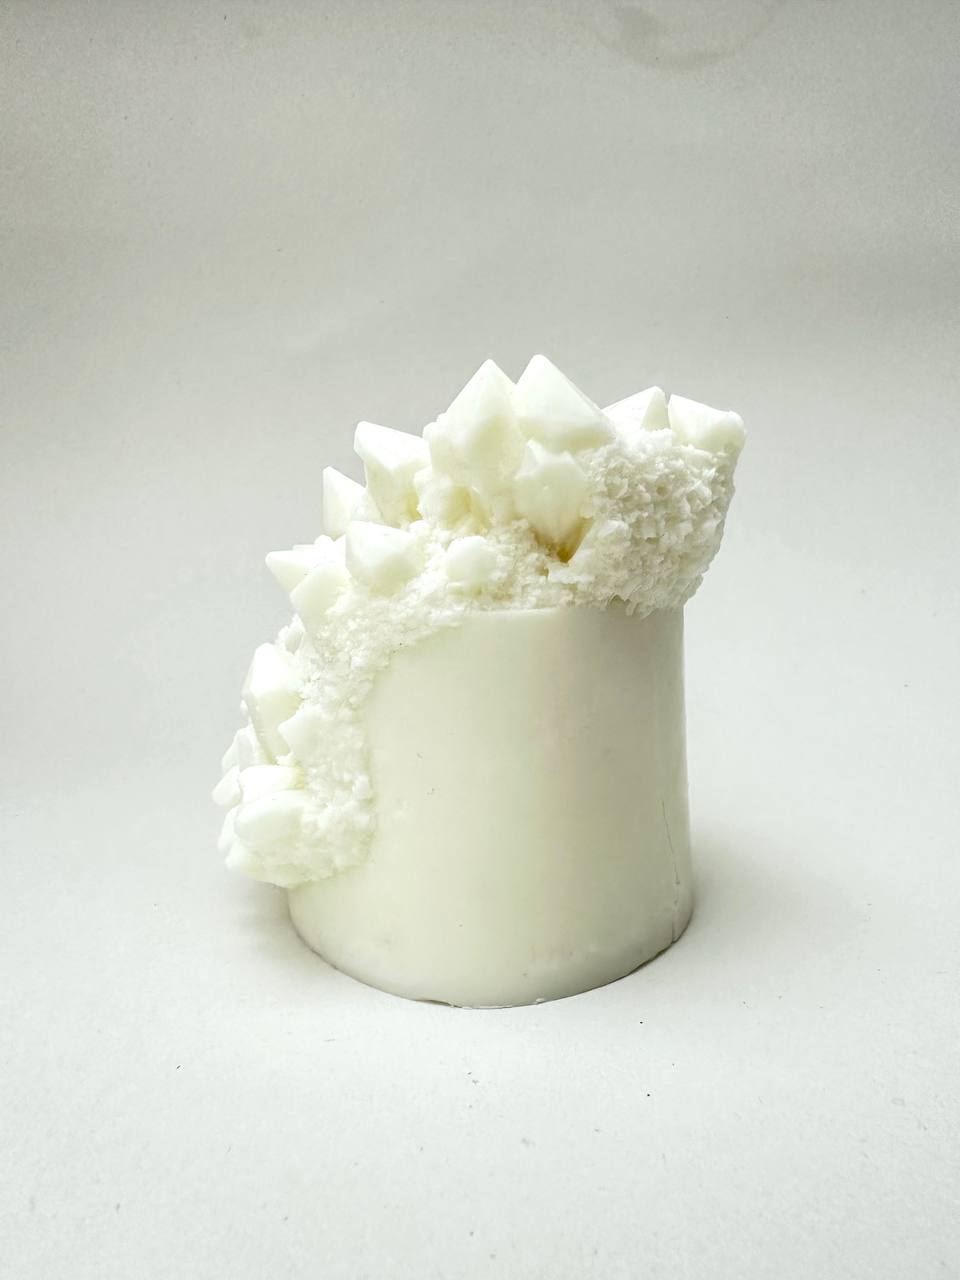 Exclusive Crystal Large Silicone Mold Artisanal Candle Making